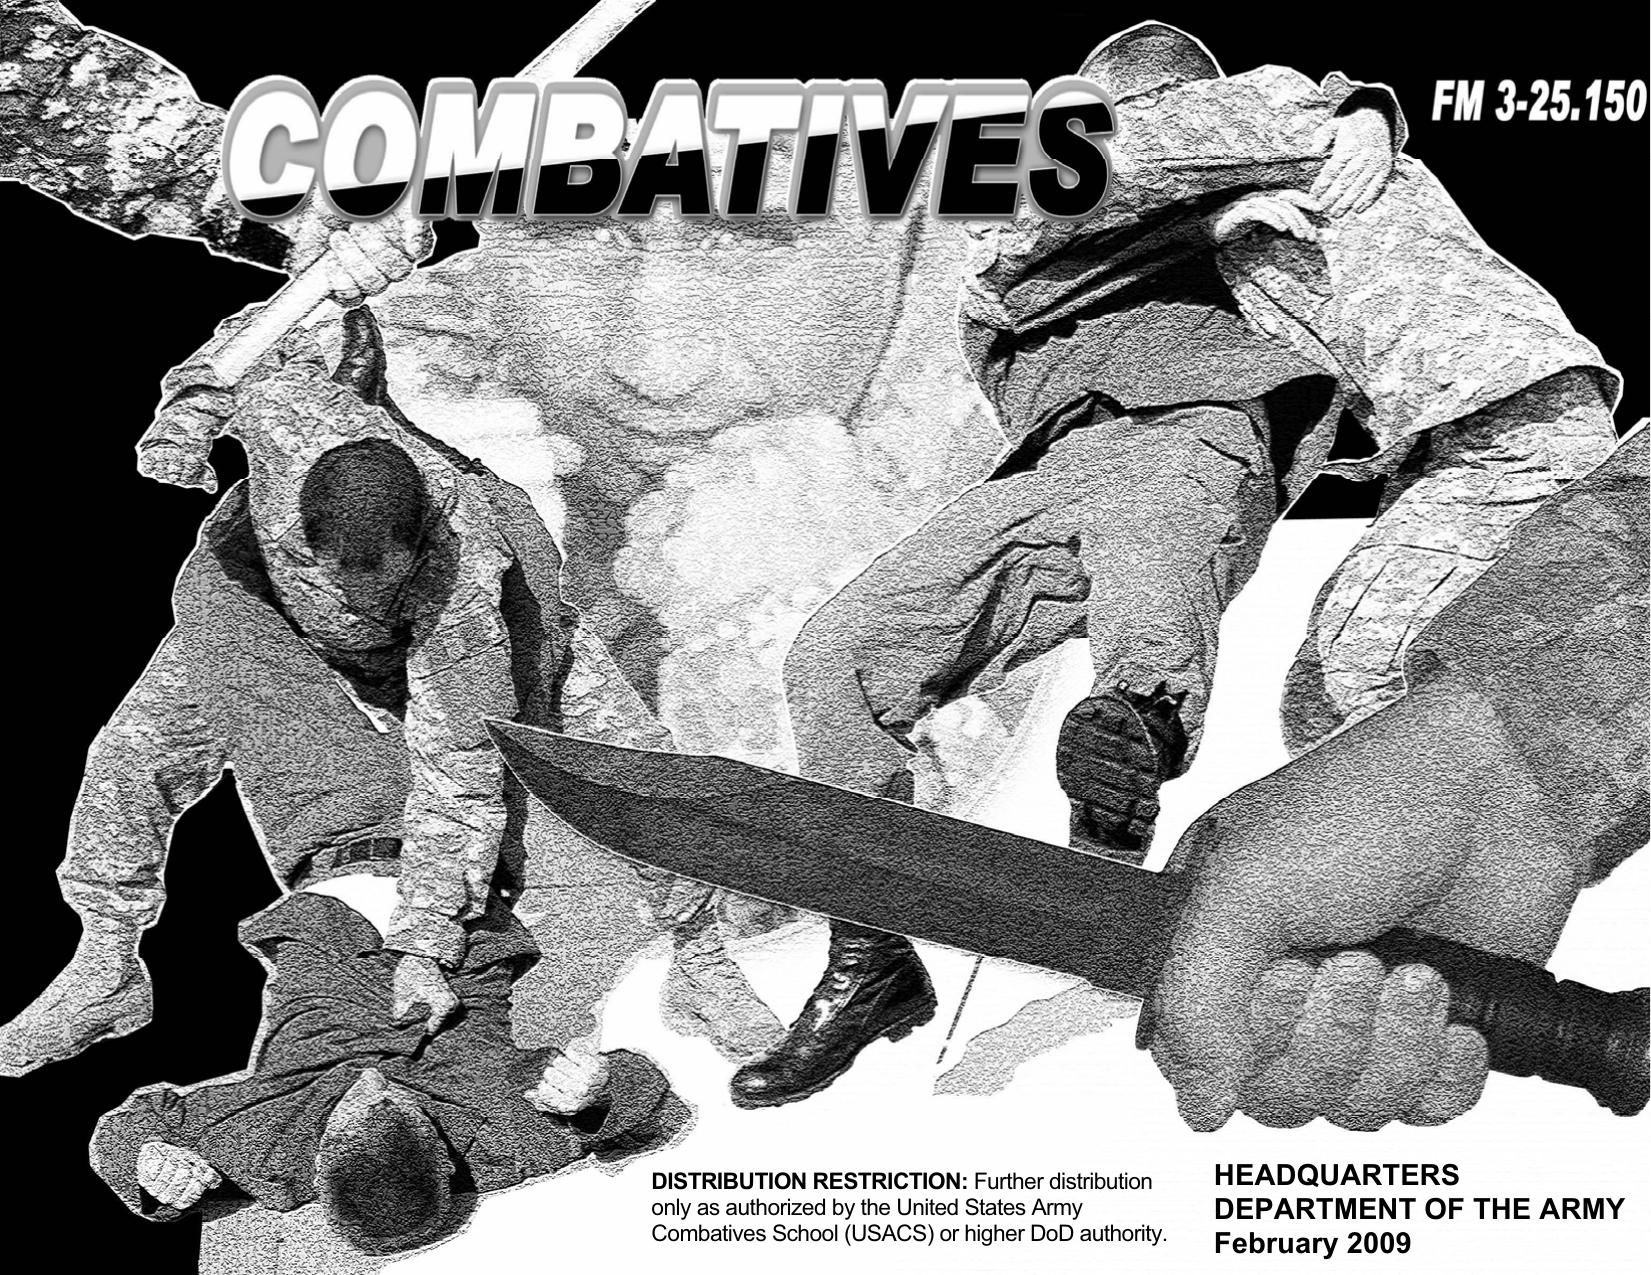 Combatives - FM 3-25.150 by U.S. Army